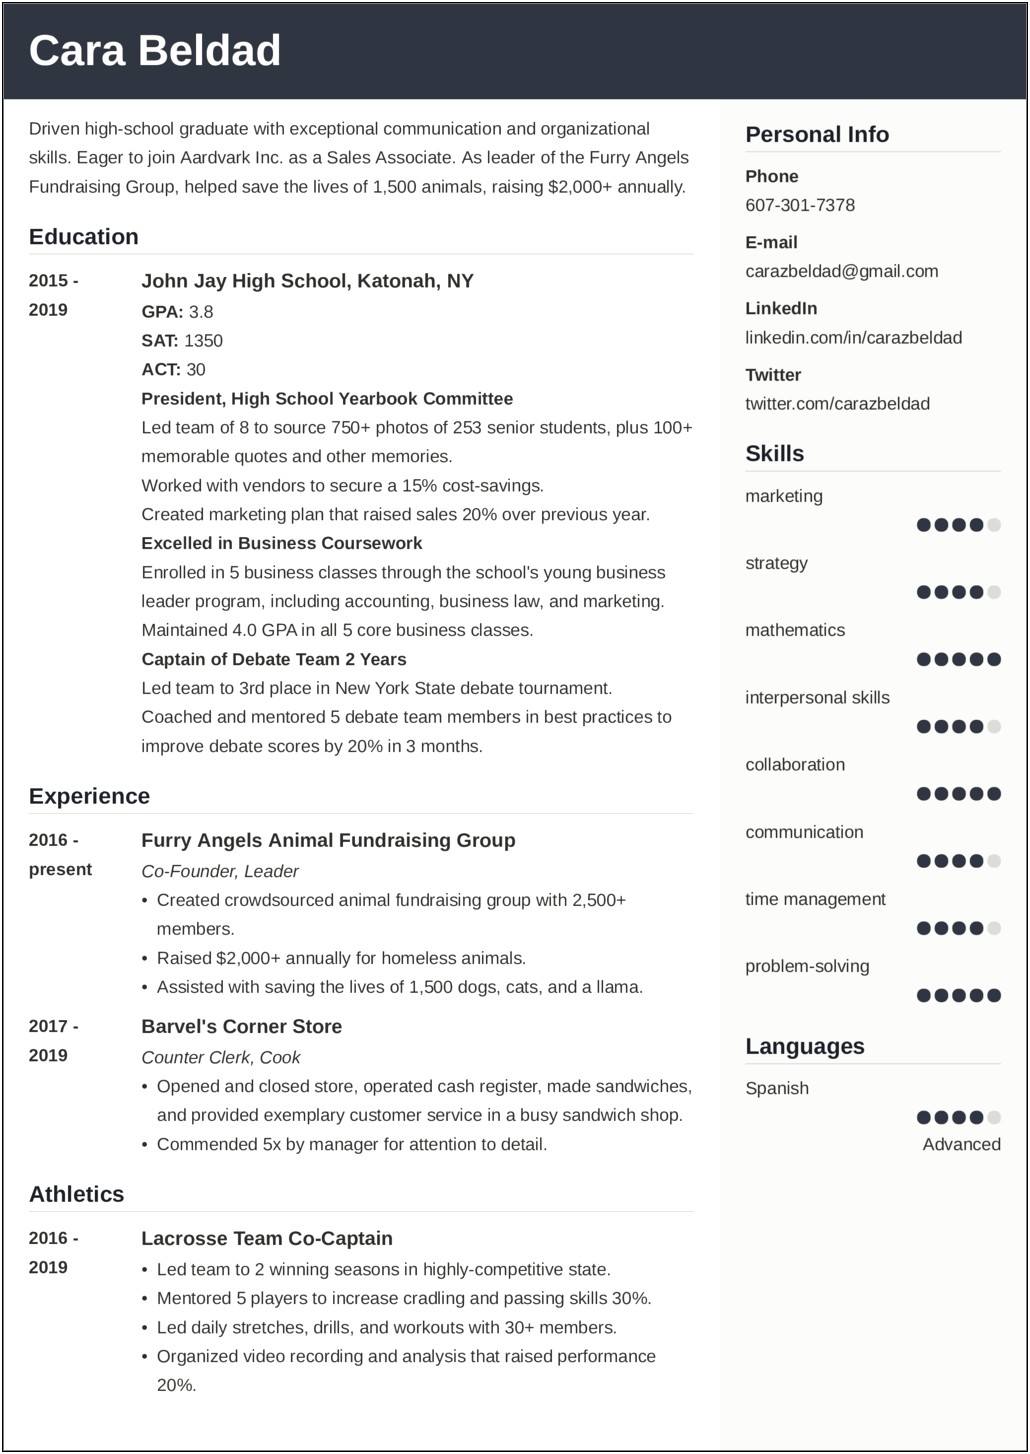 Resume Master In Accounting Degree Objectives Examples